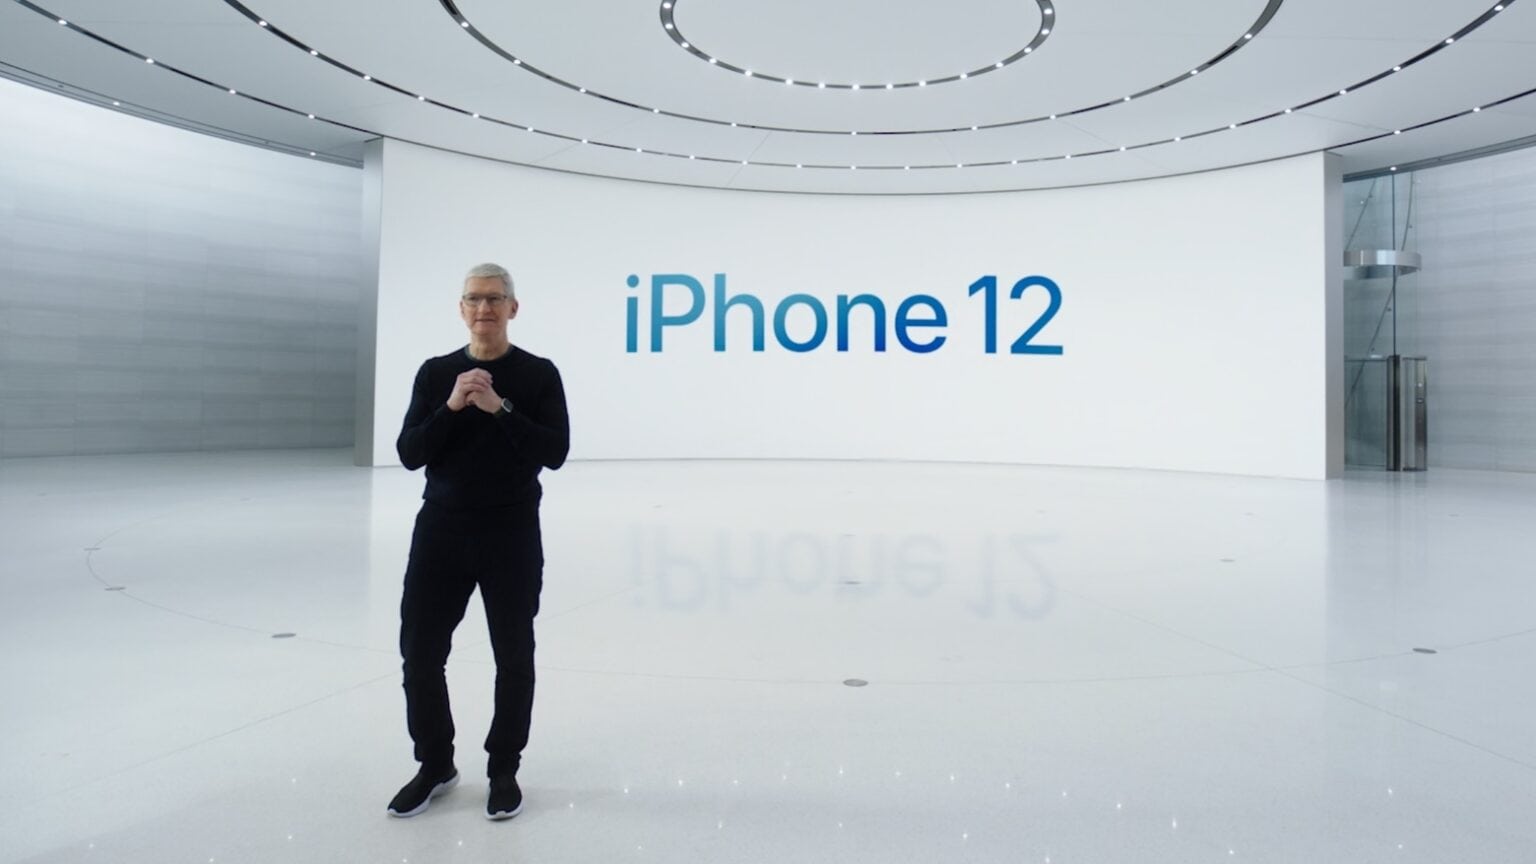 The Apple “Hi, Speed” event was critical, including the iPhone 12 launch.